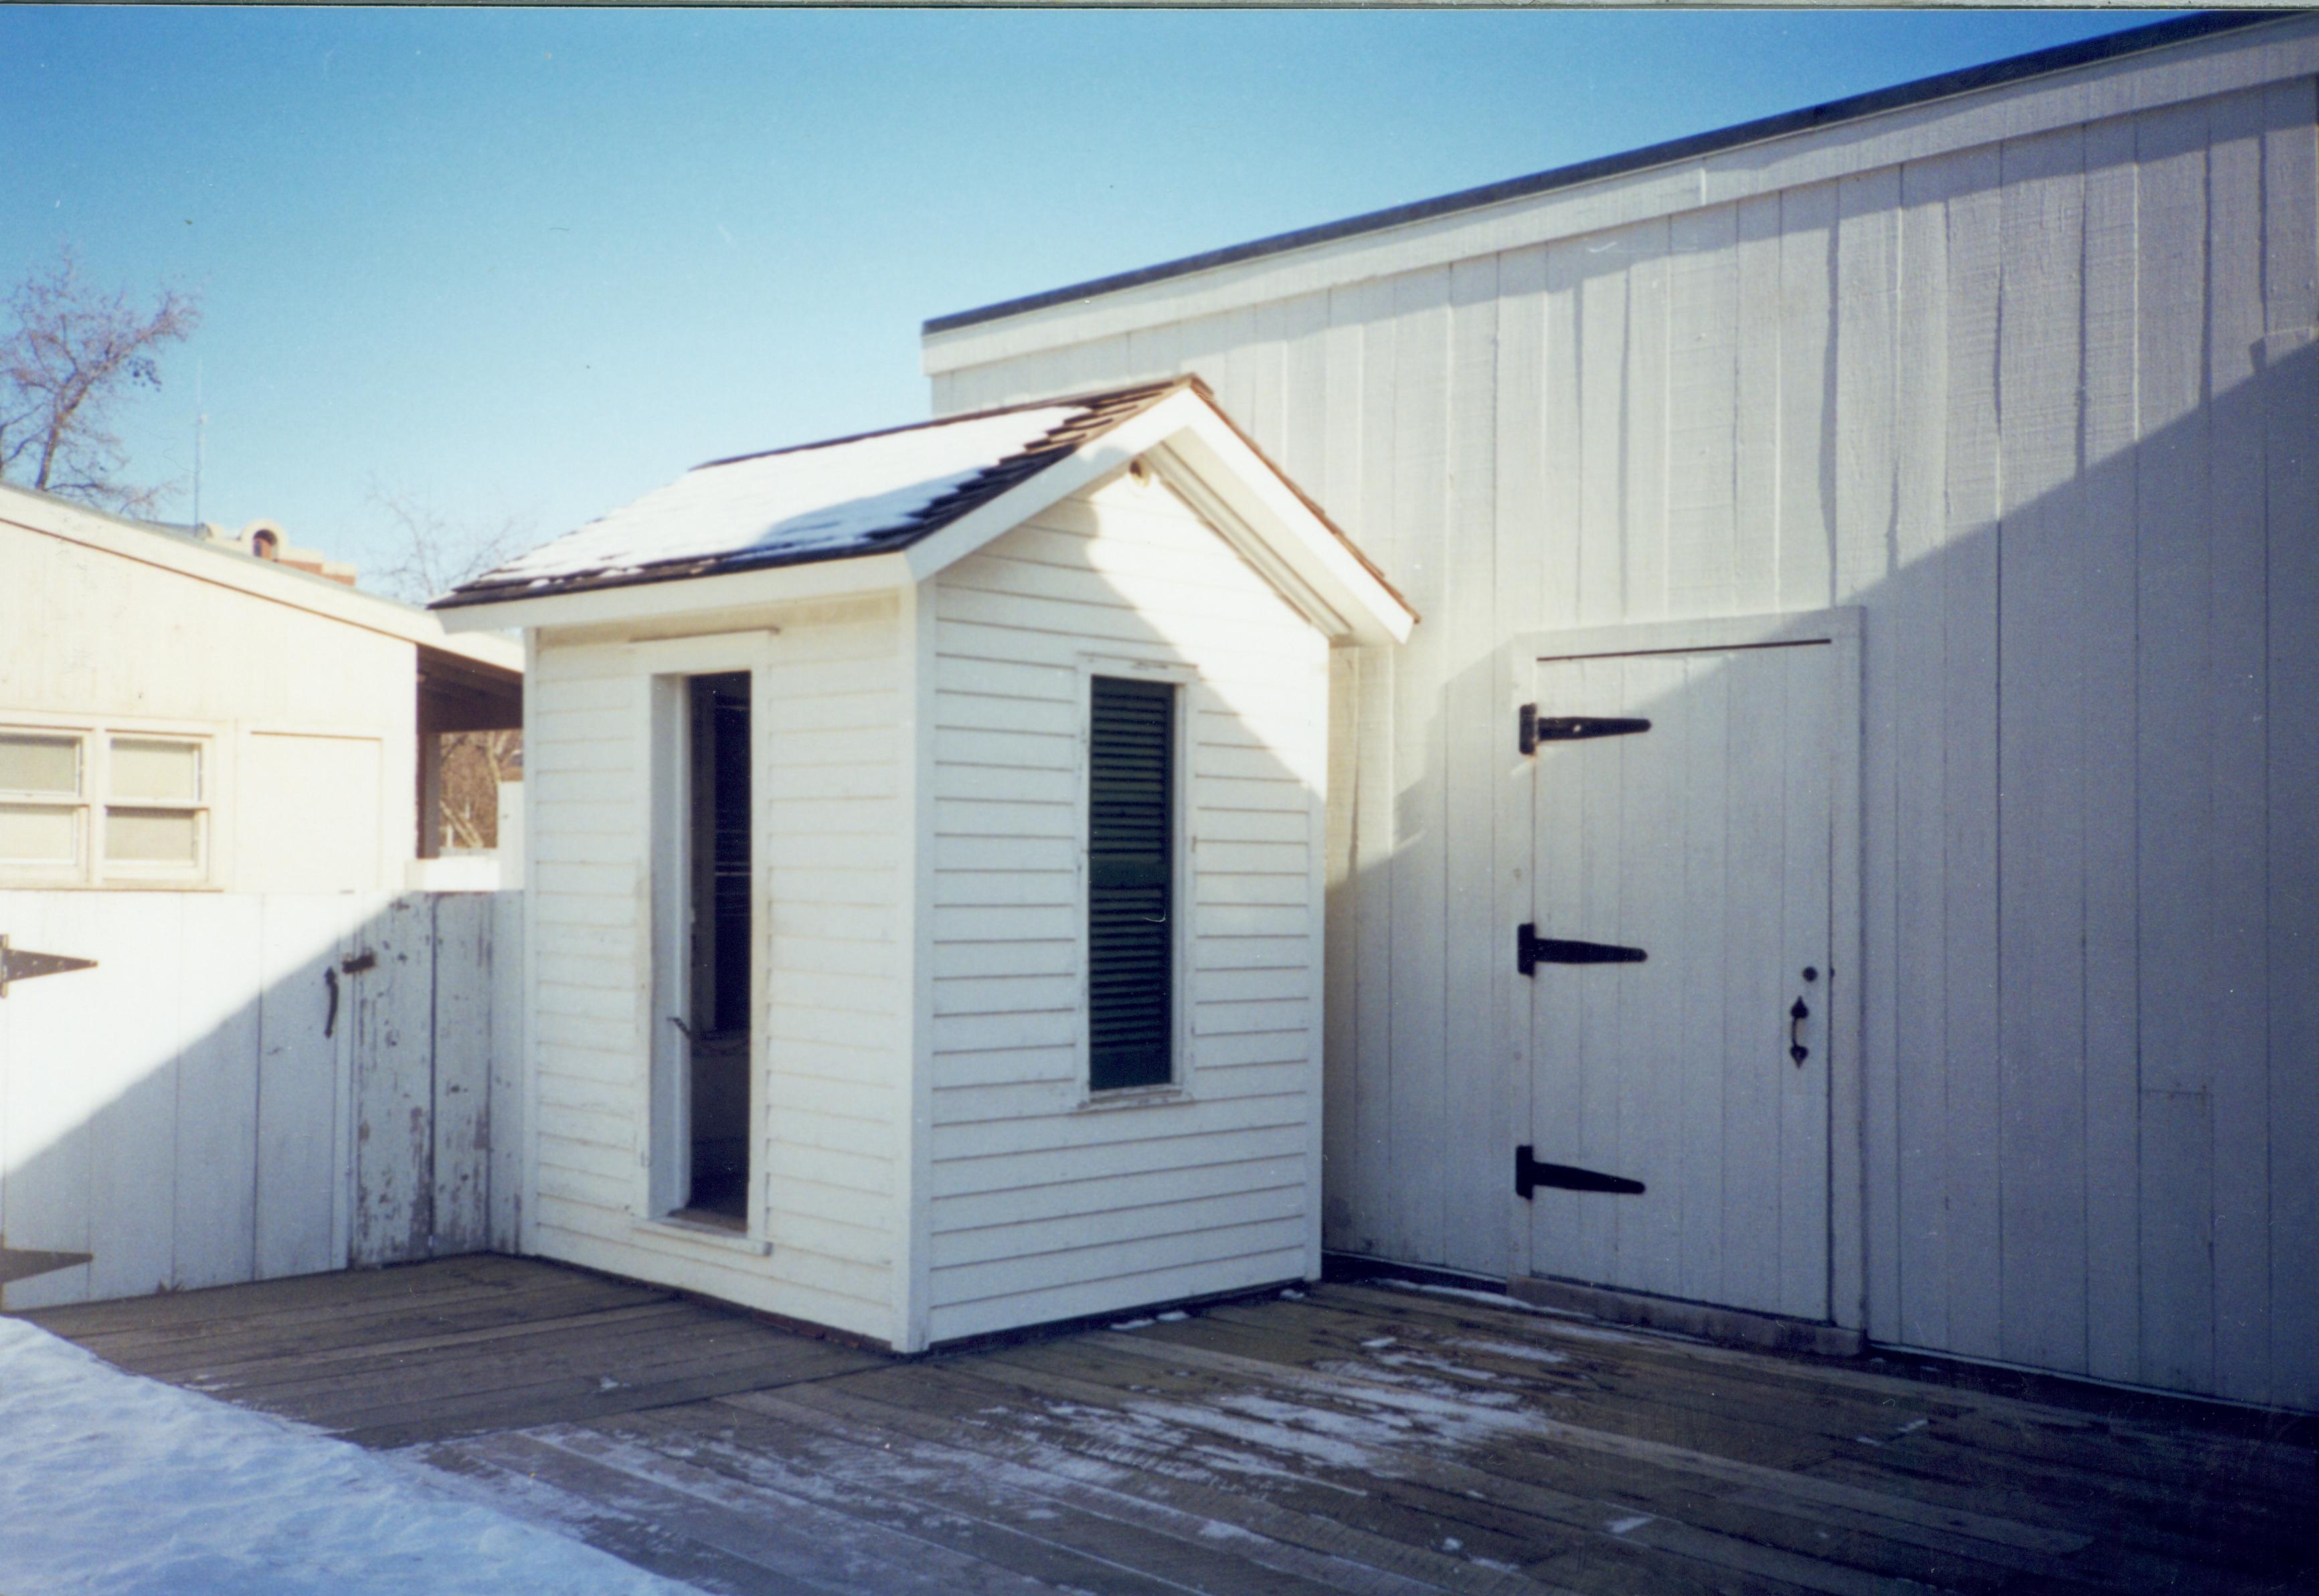 LIHO Privy Research Request Exp.3 Lincoln Home, Privy, Exterior, Snow